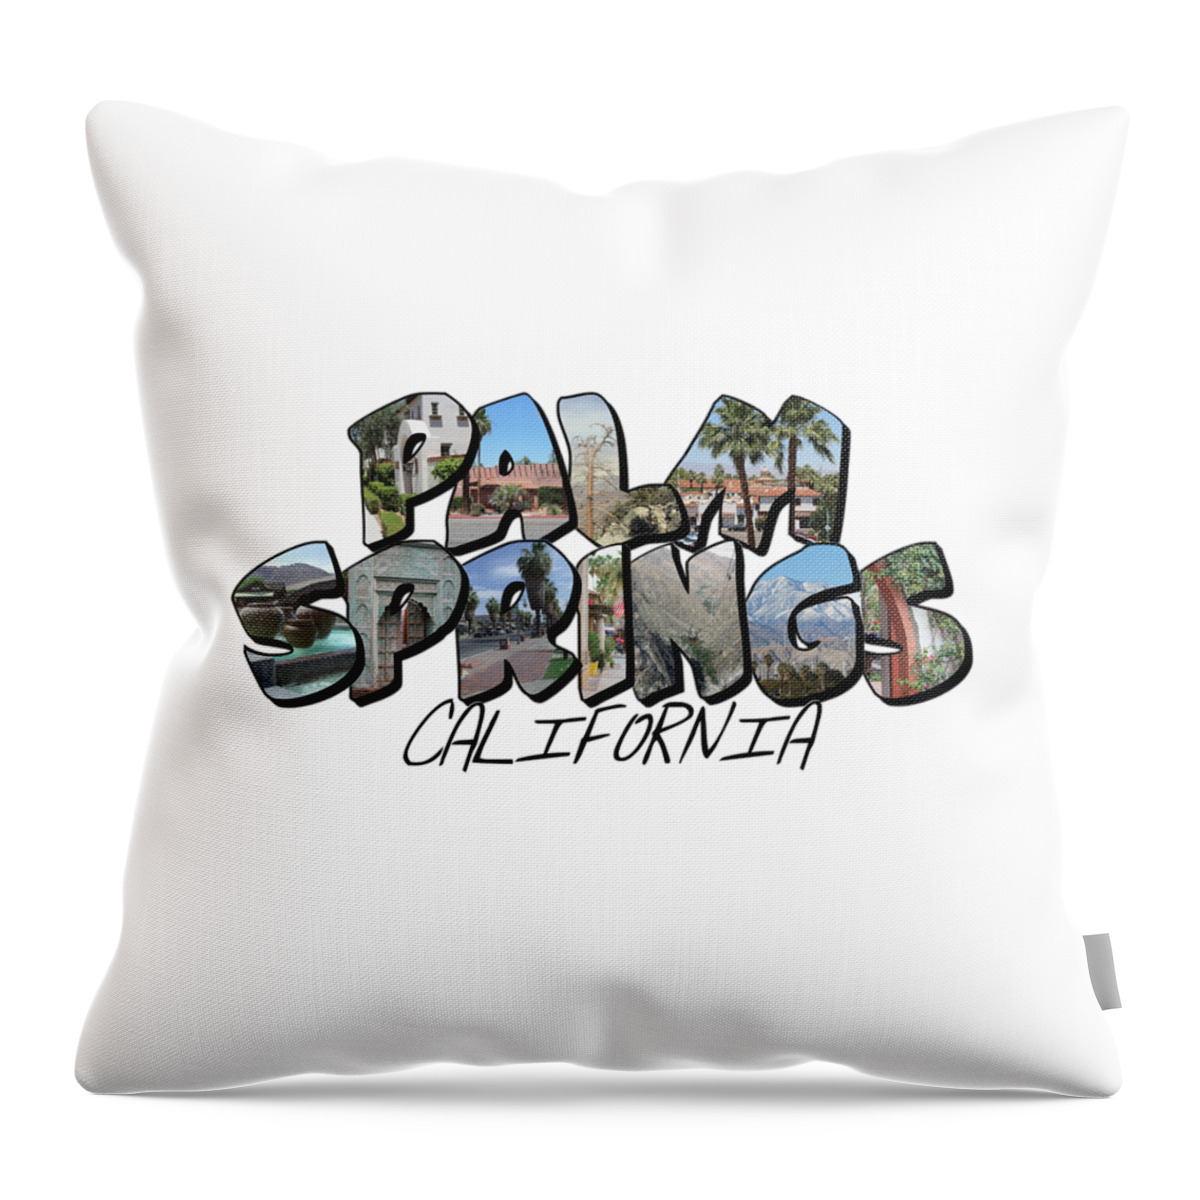 Downtown Palm Springs Throw Pillow featuring the digital art Large Letter Palm Springs California by Colleen Cornelius